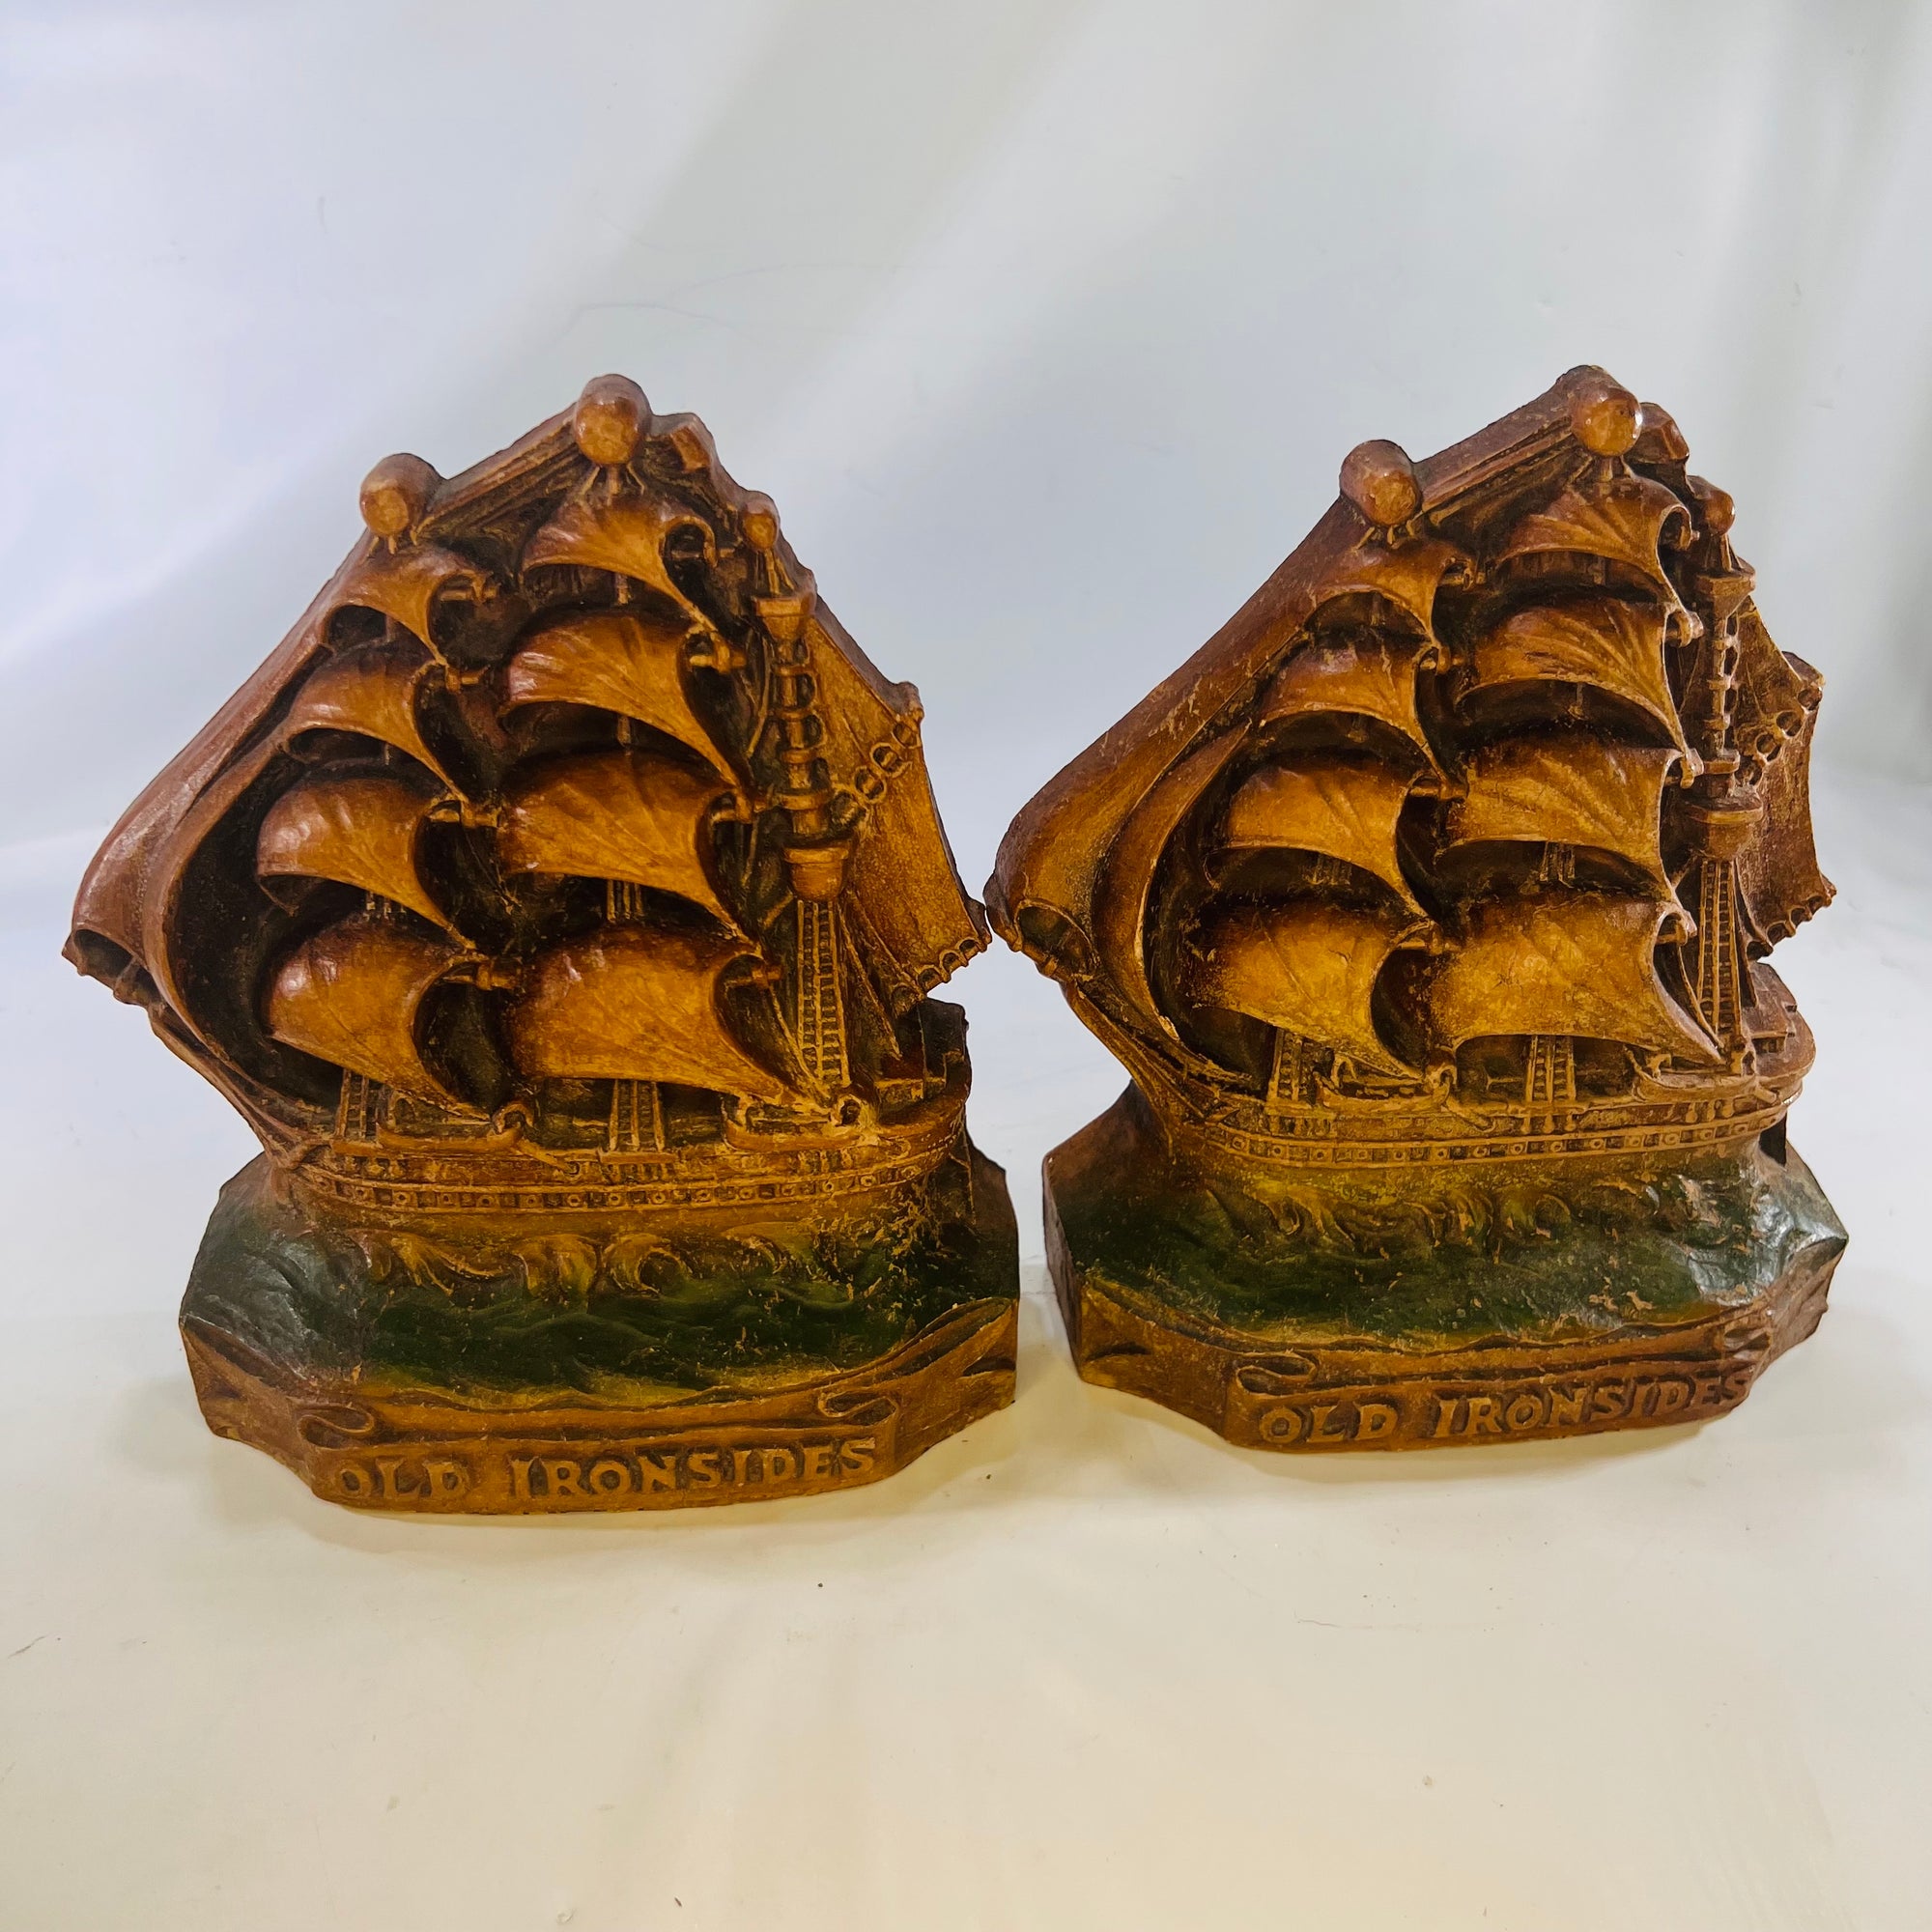 Pair of Old Ironside Ship Wooden Bookends 1940s-Reading Vintage